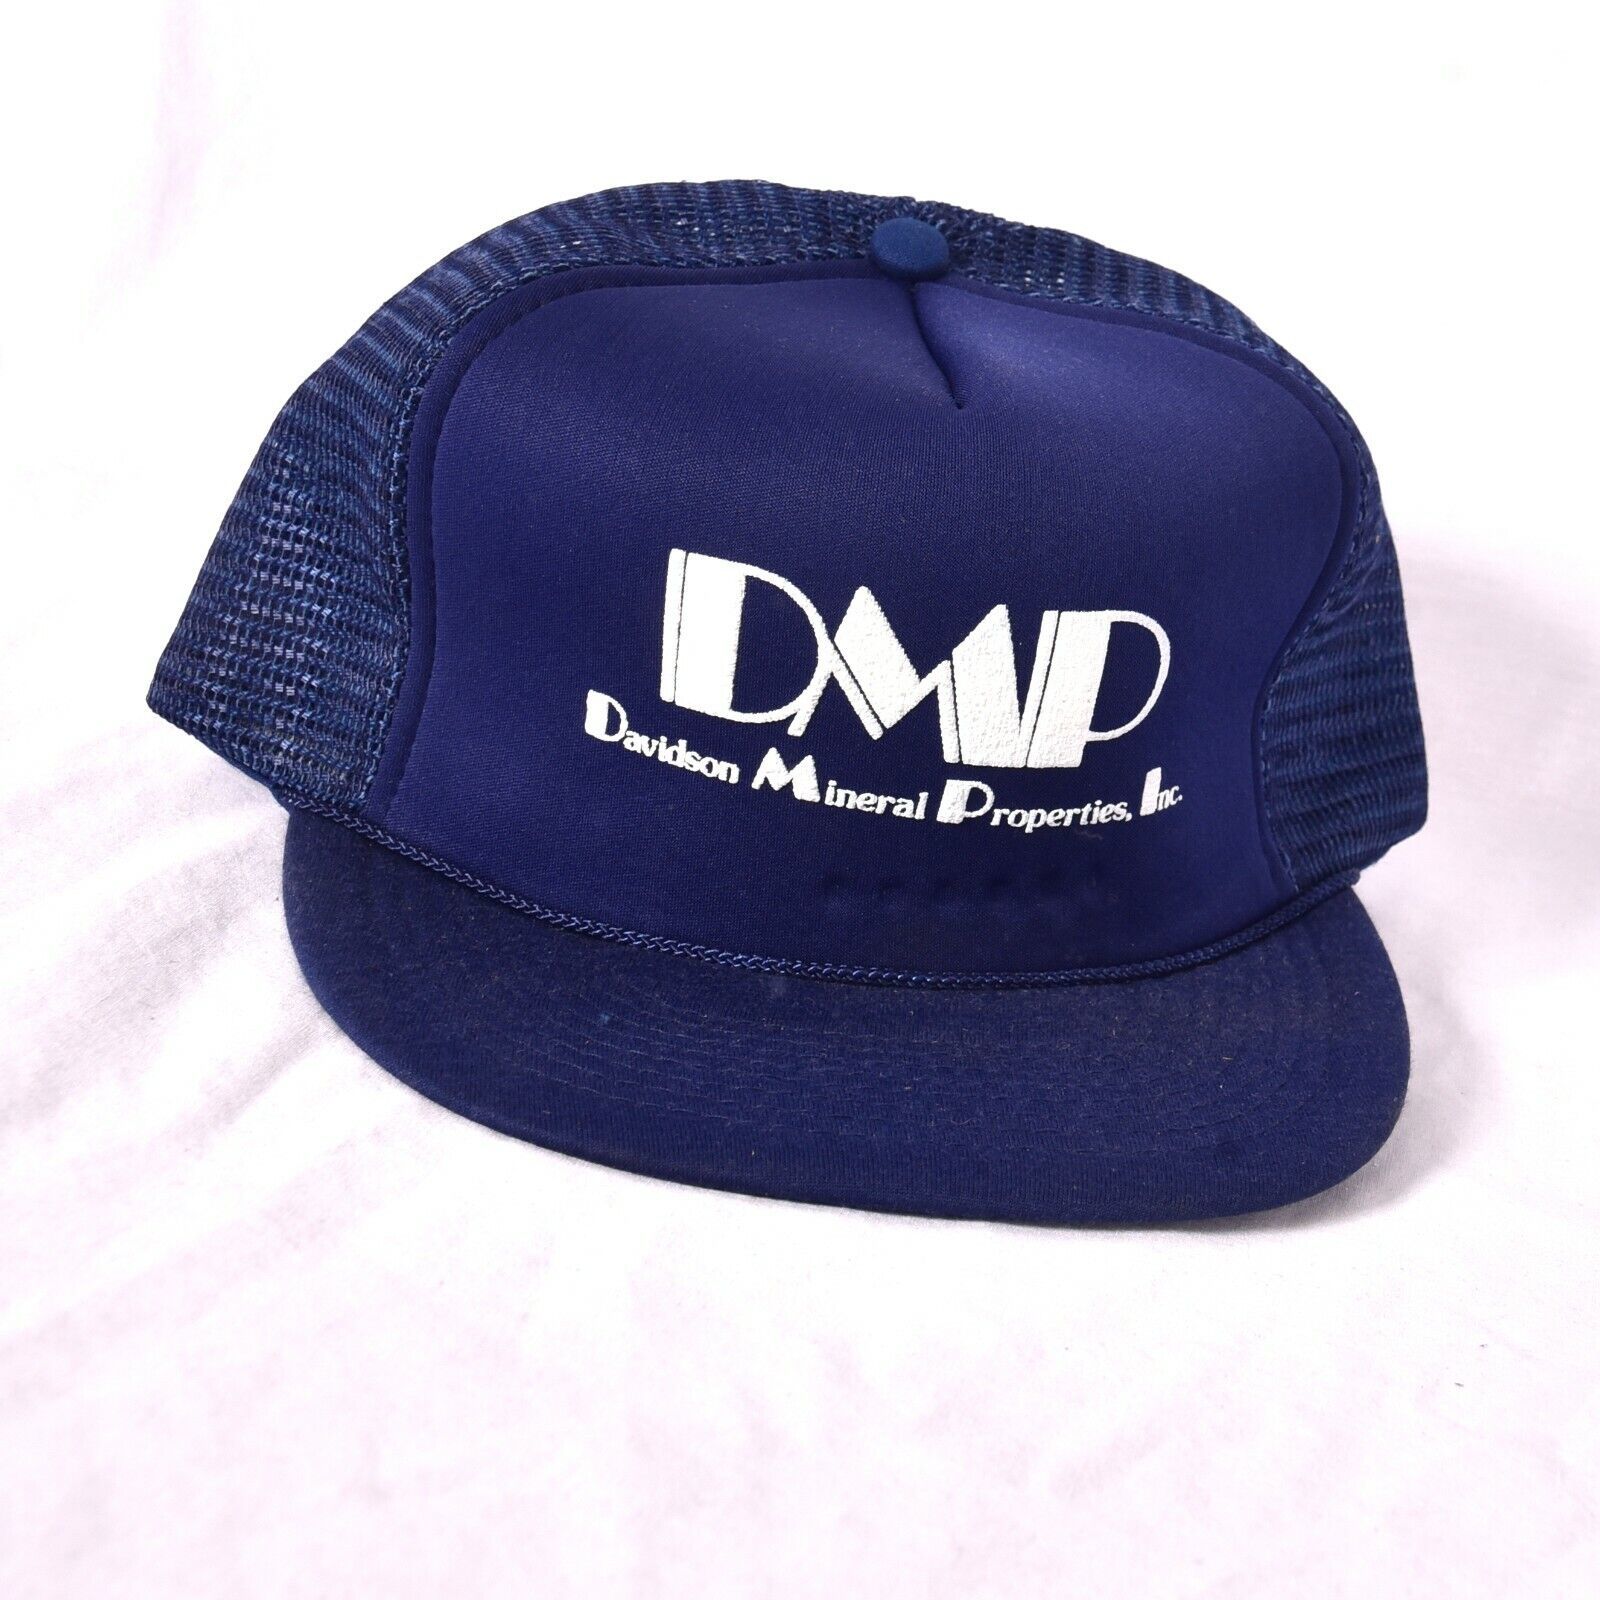 Primary image for San Sun Davidson Mineral Properties Base Ball Snap Back Trucker Hat